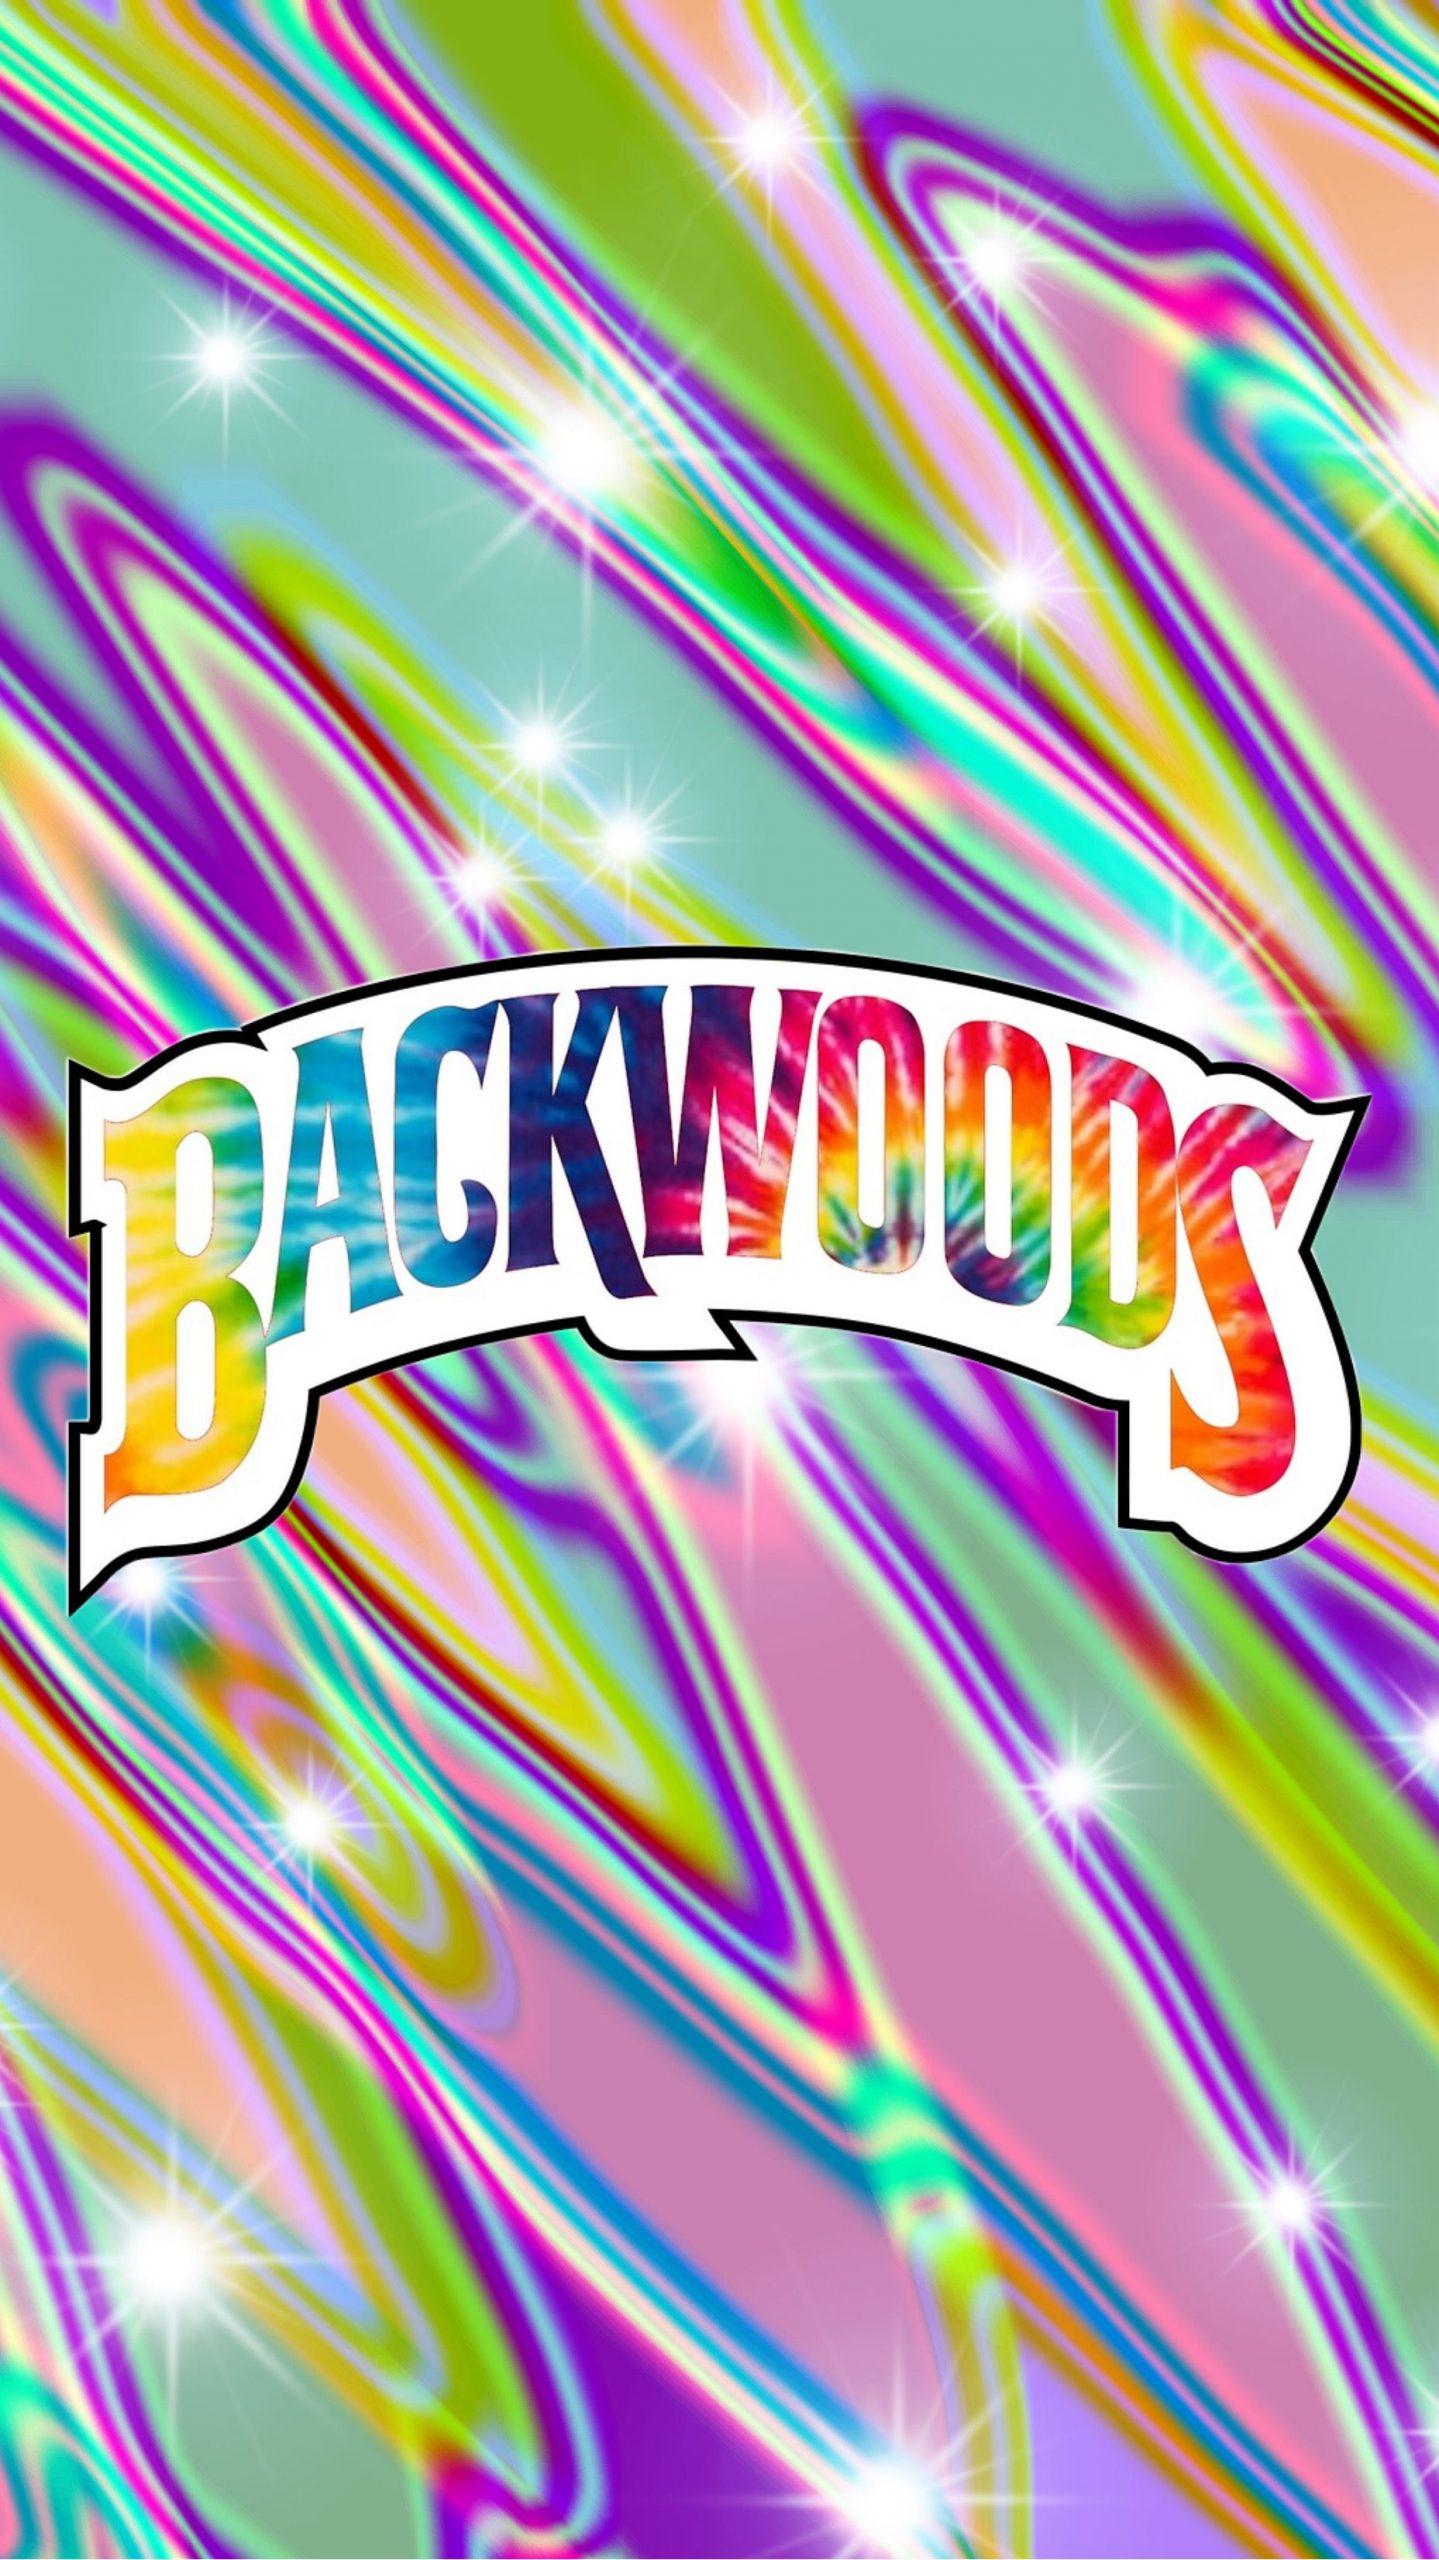 Rick and Morty Backwoods Wallpapers Top Free Rick and Morty Backwoods 